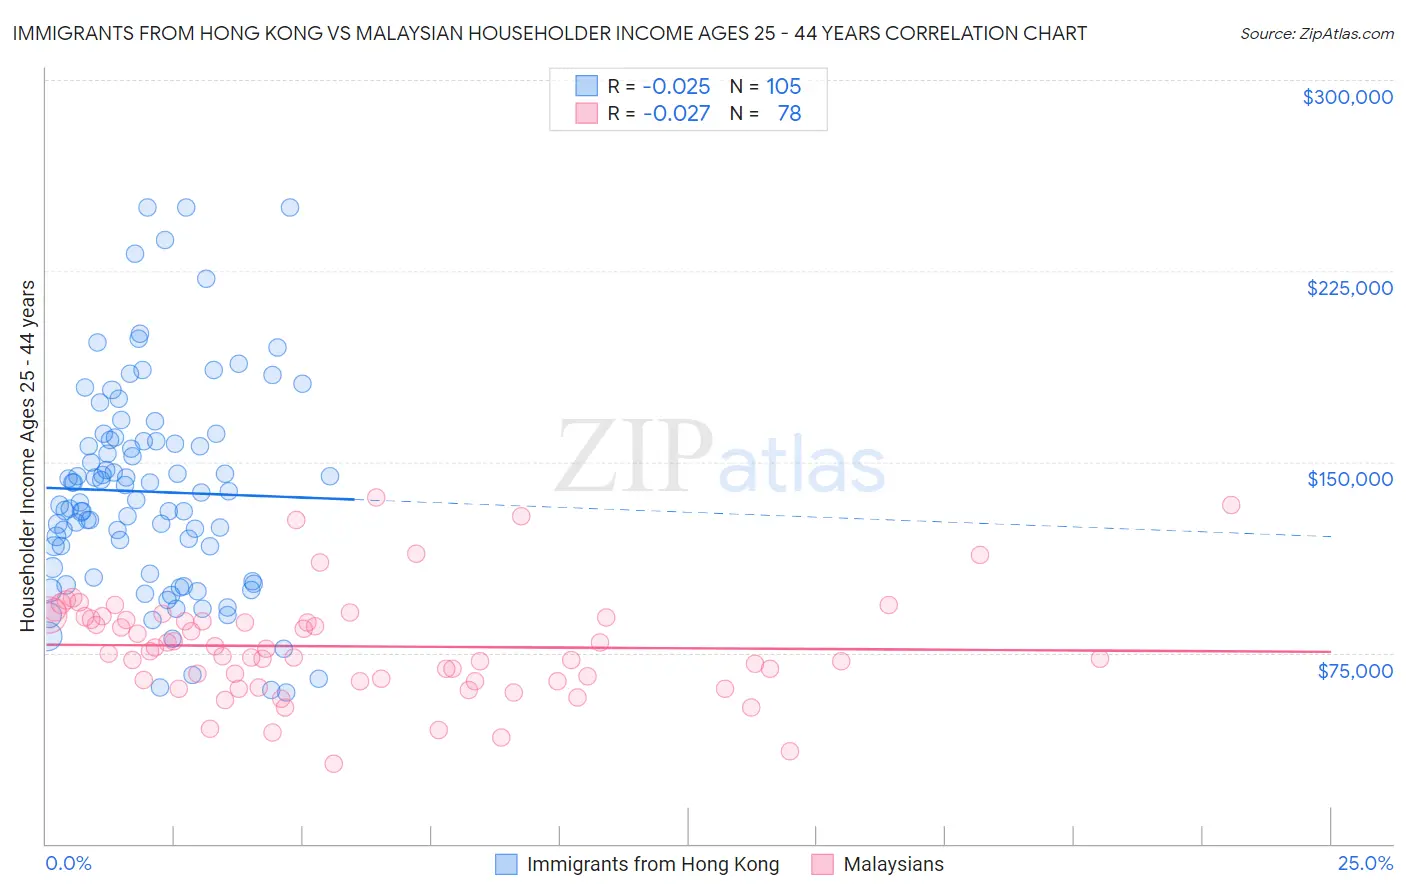 Immigrants from Hong Kong vs Malaysian Householder Income Ages 25 - 44 years